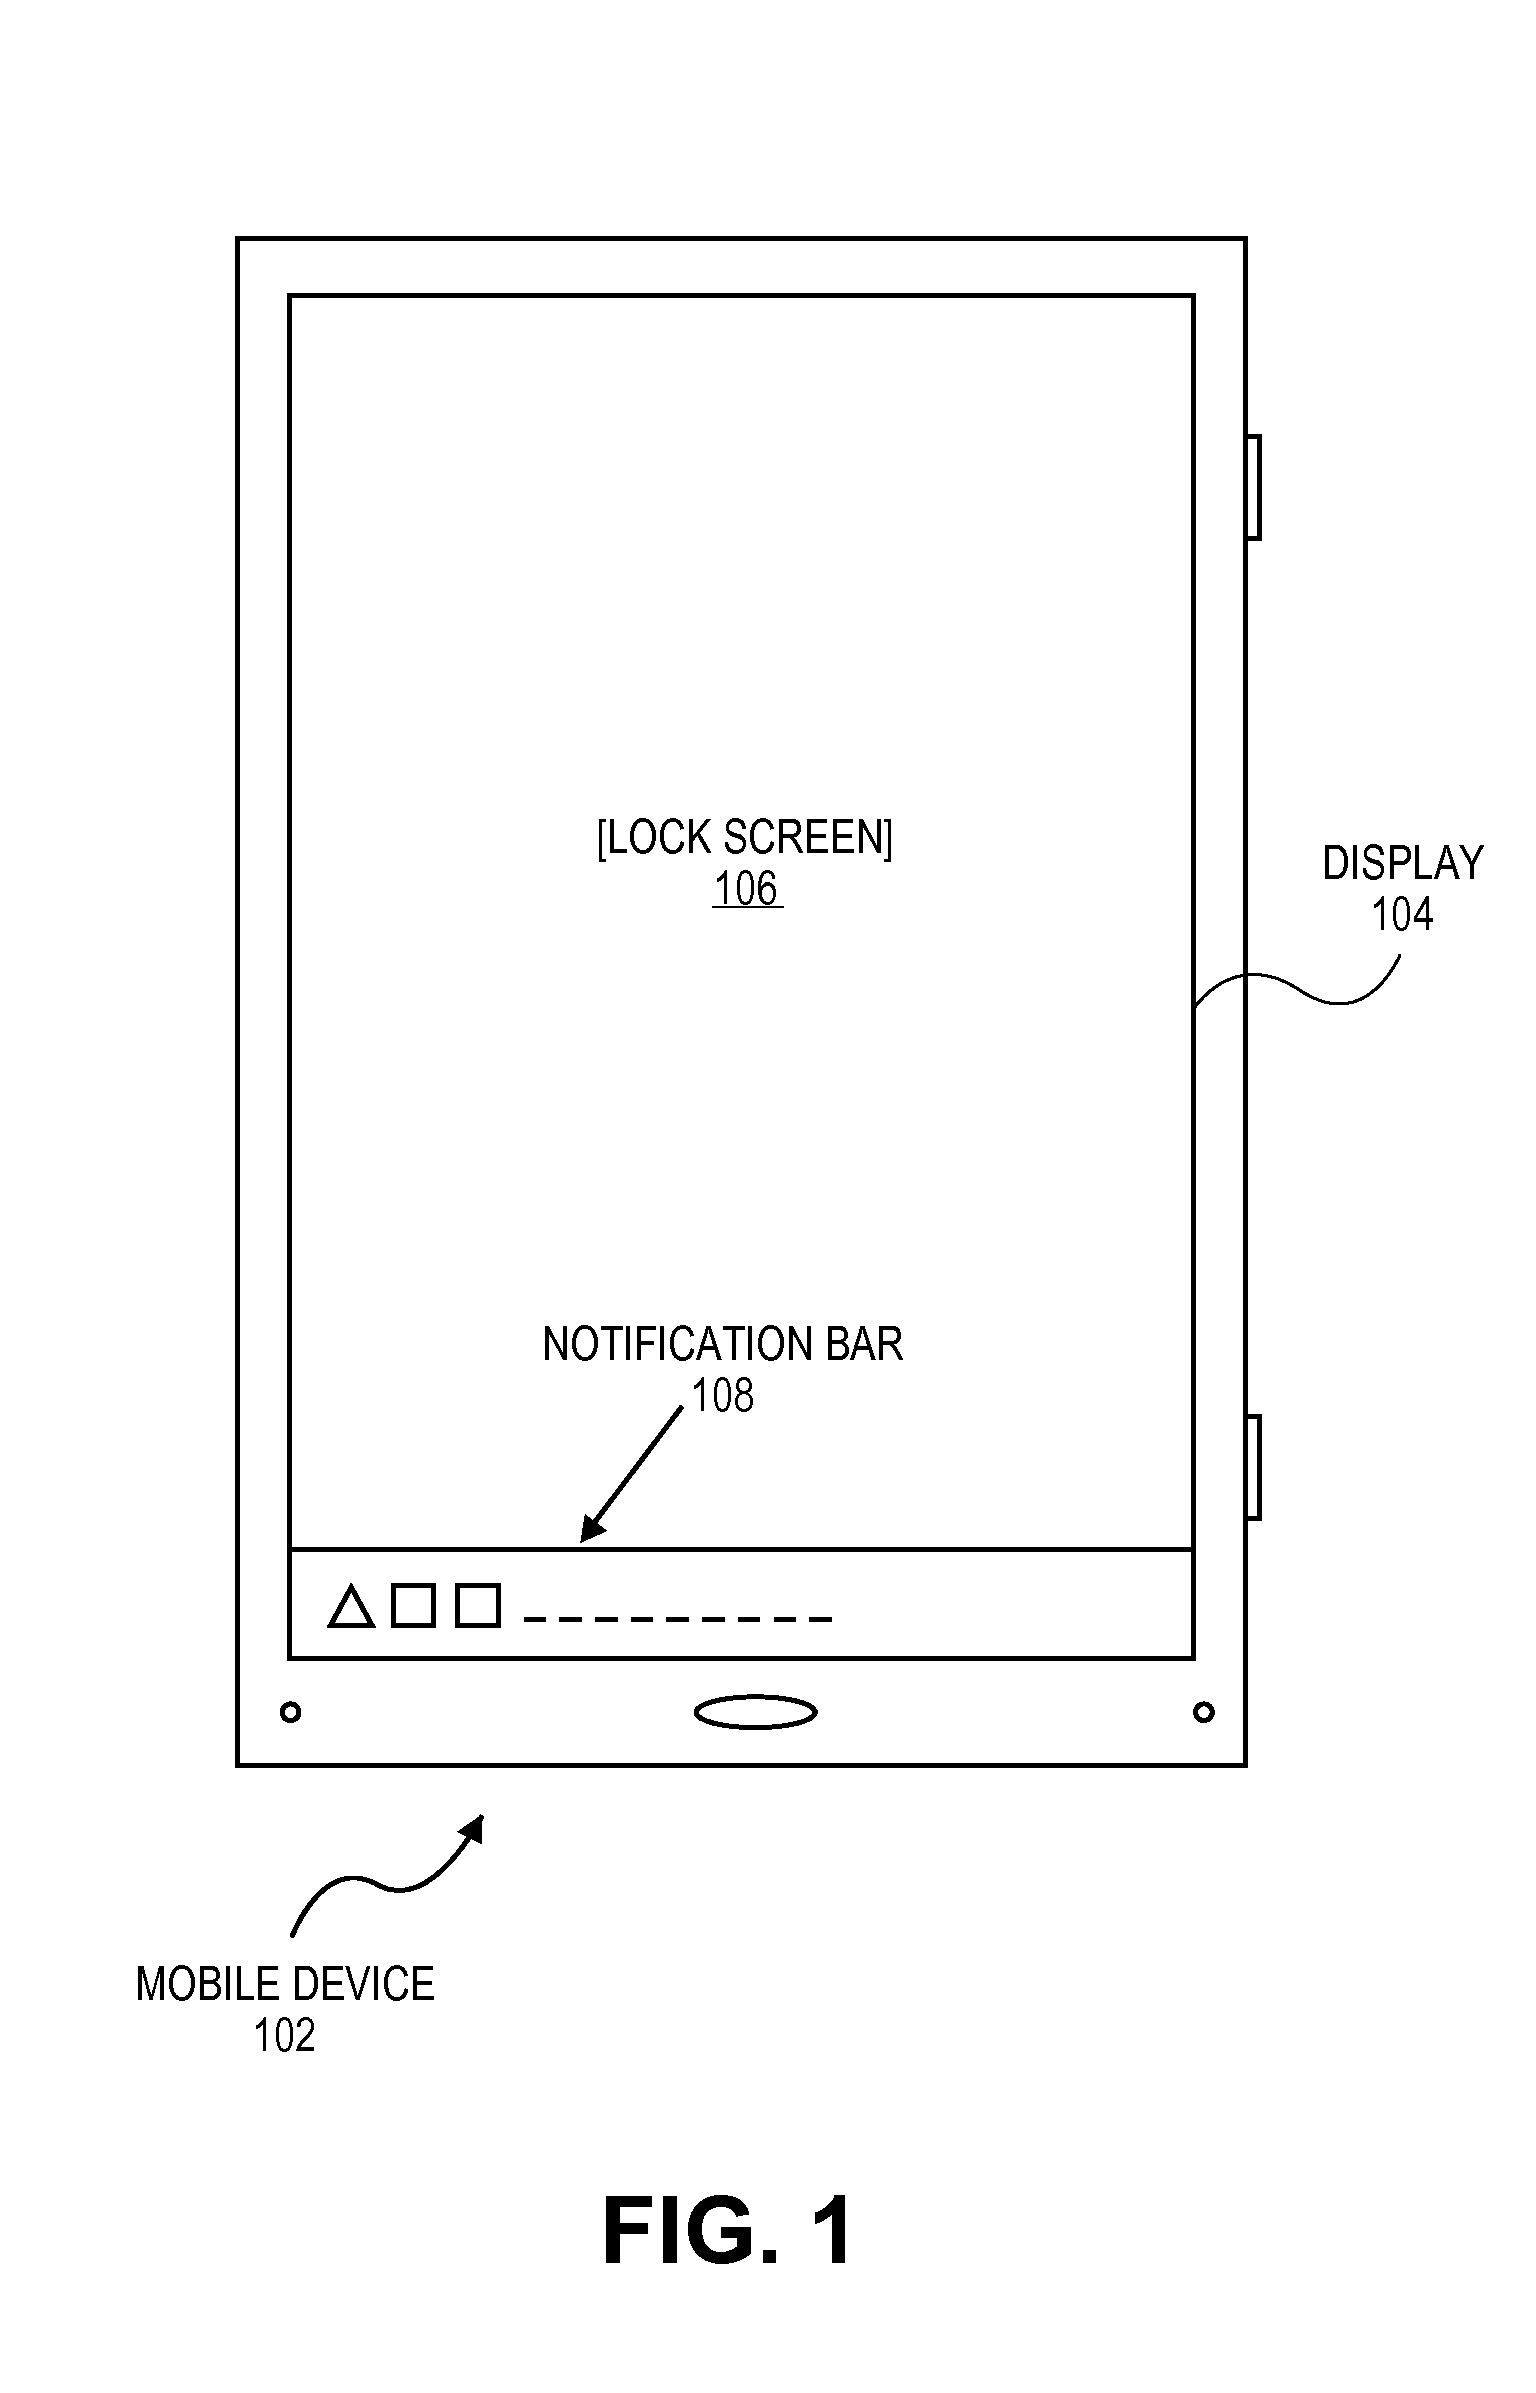 Extending mobile applications to the lock screen of a mobile device